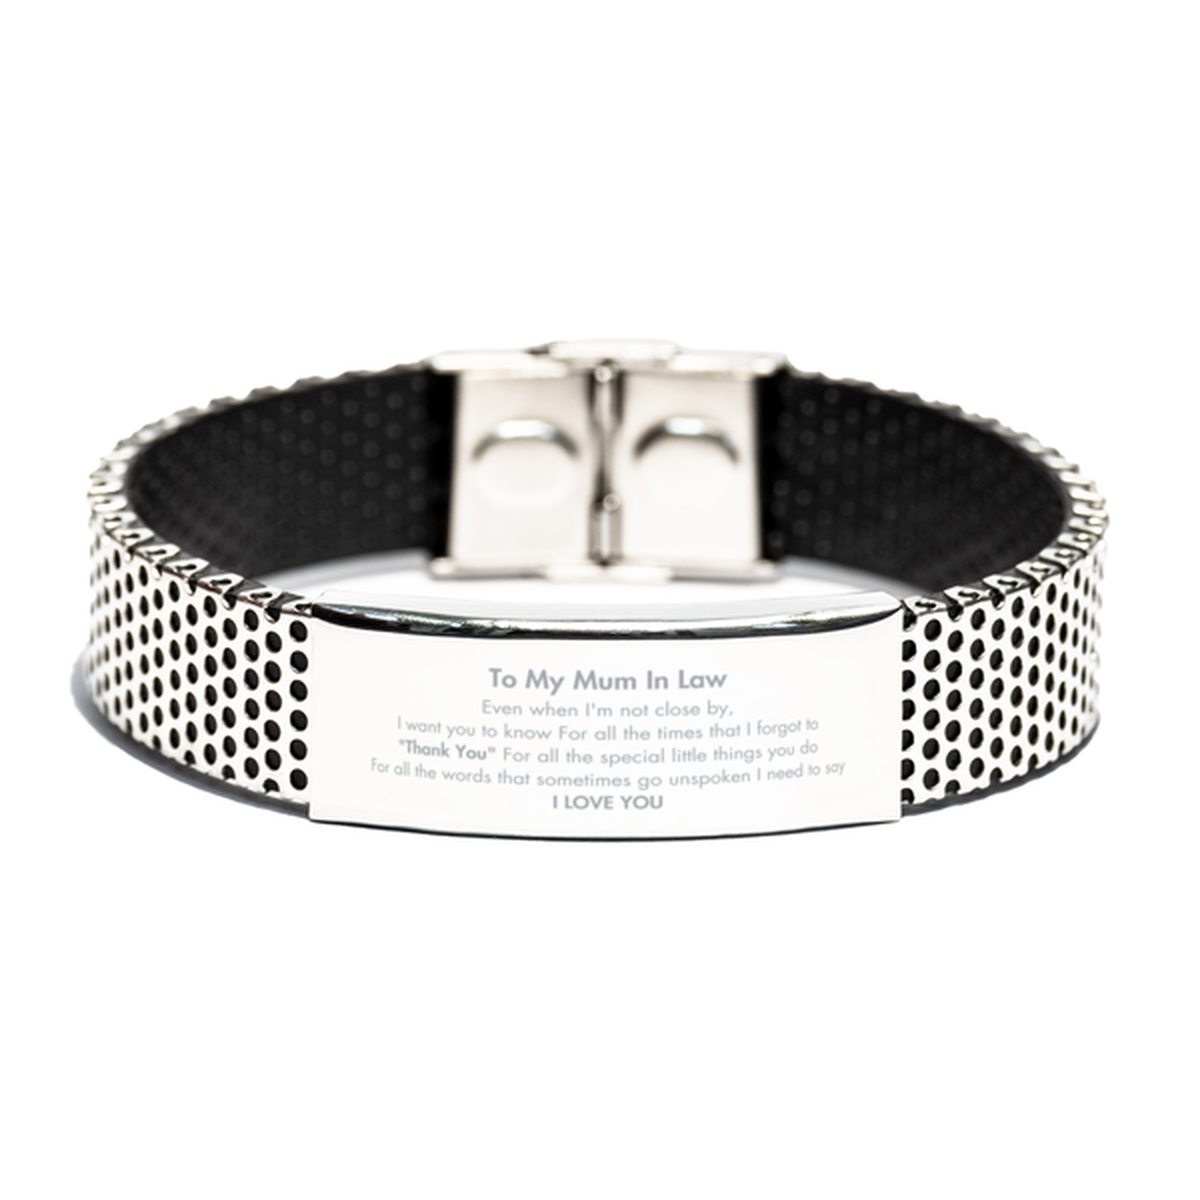 Thank You Gifts for Mum In Law , Keepsake Stainless Steel Bracelet Gifts for Mum In Law  Birthday Mother's day Father's Day Mum In Law  For all the words That sometimes go unspoken I need to say I LOVE YOU